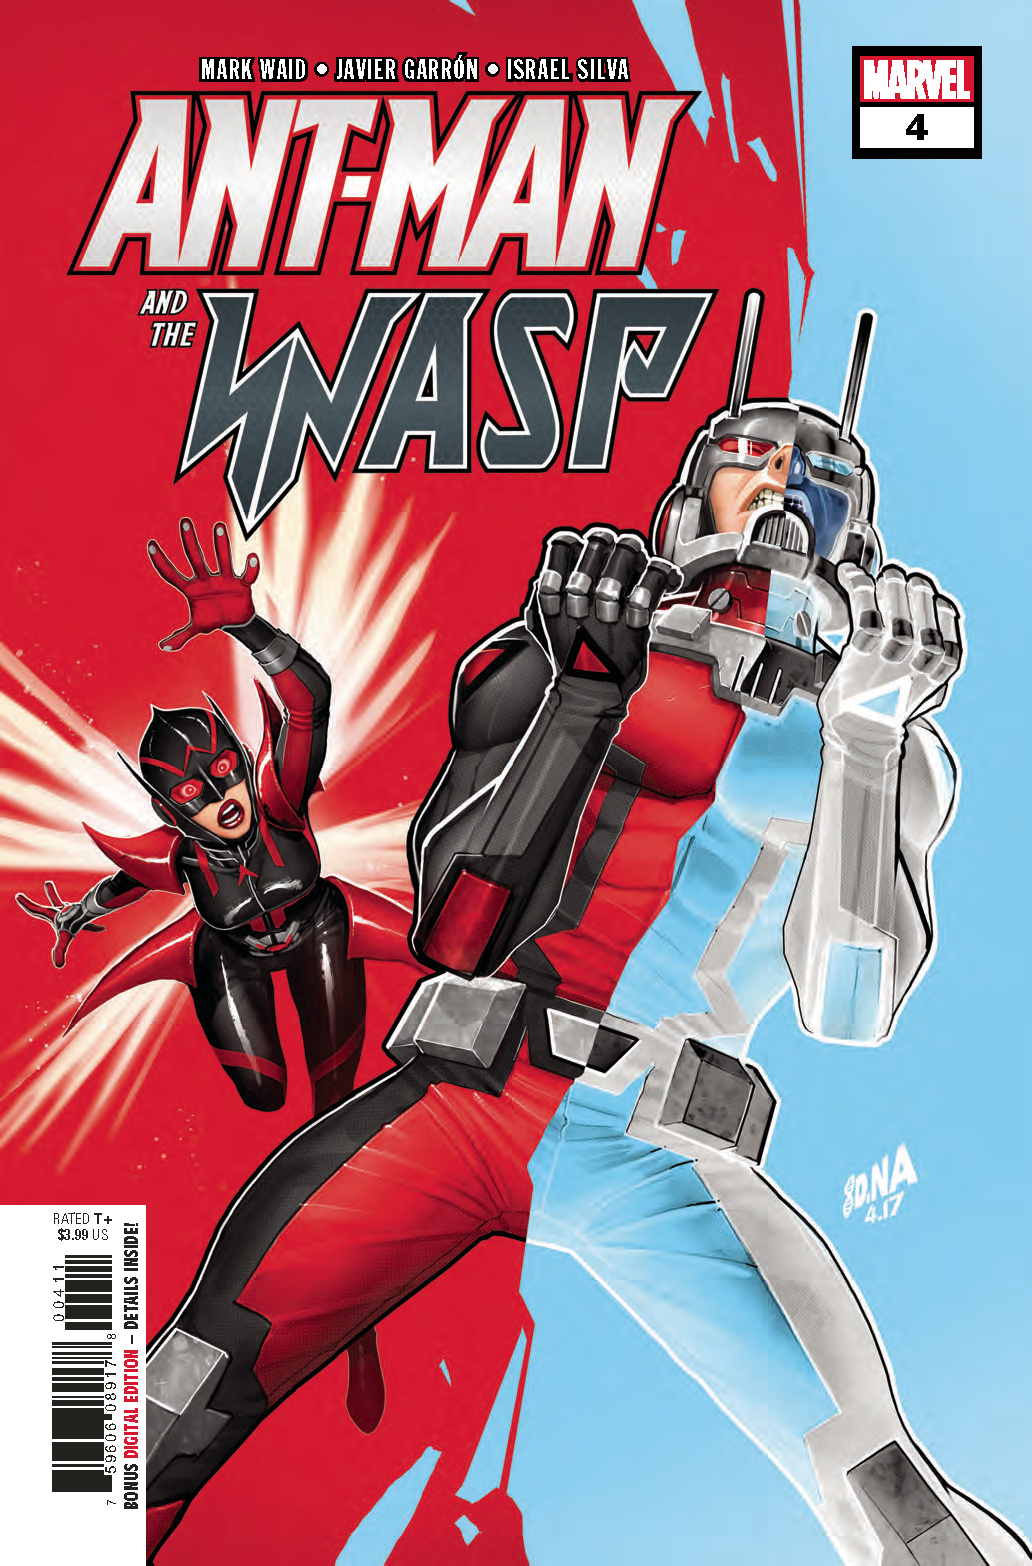 ANT-MAN AND THE WASP #4 (OF 5)